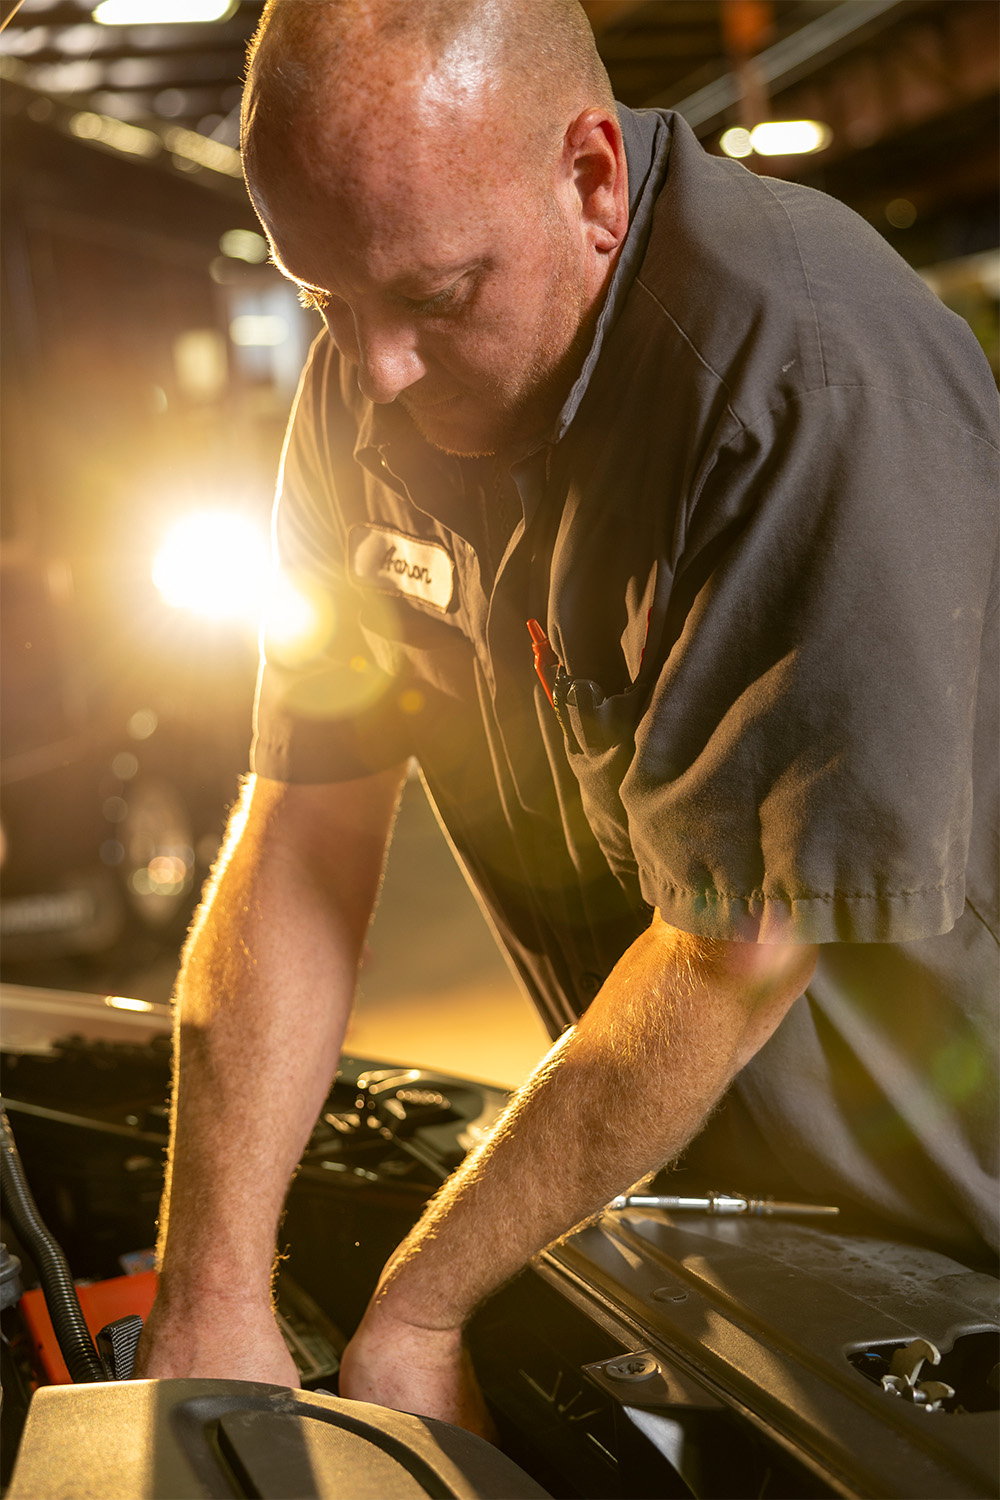 A mechanic performing maintenance and repairs on a car in a garage.